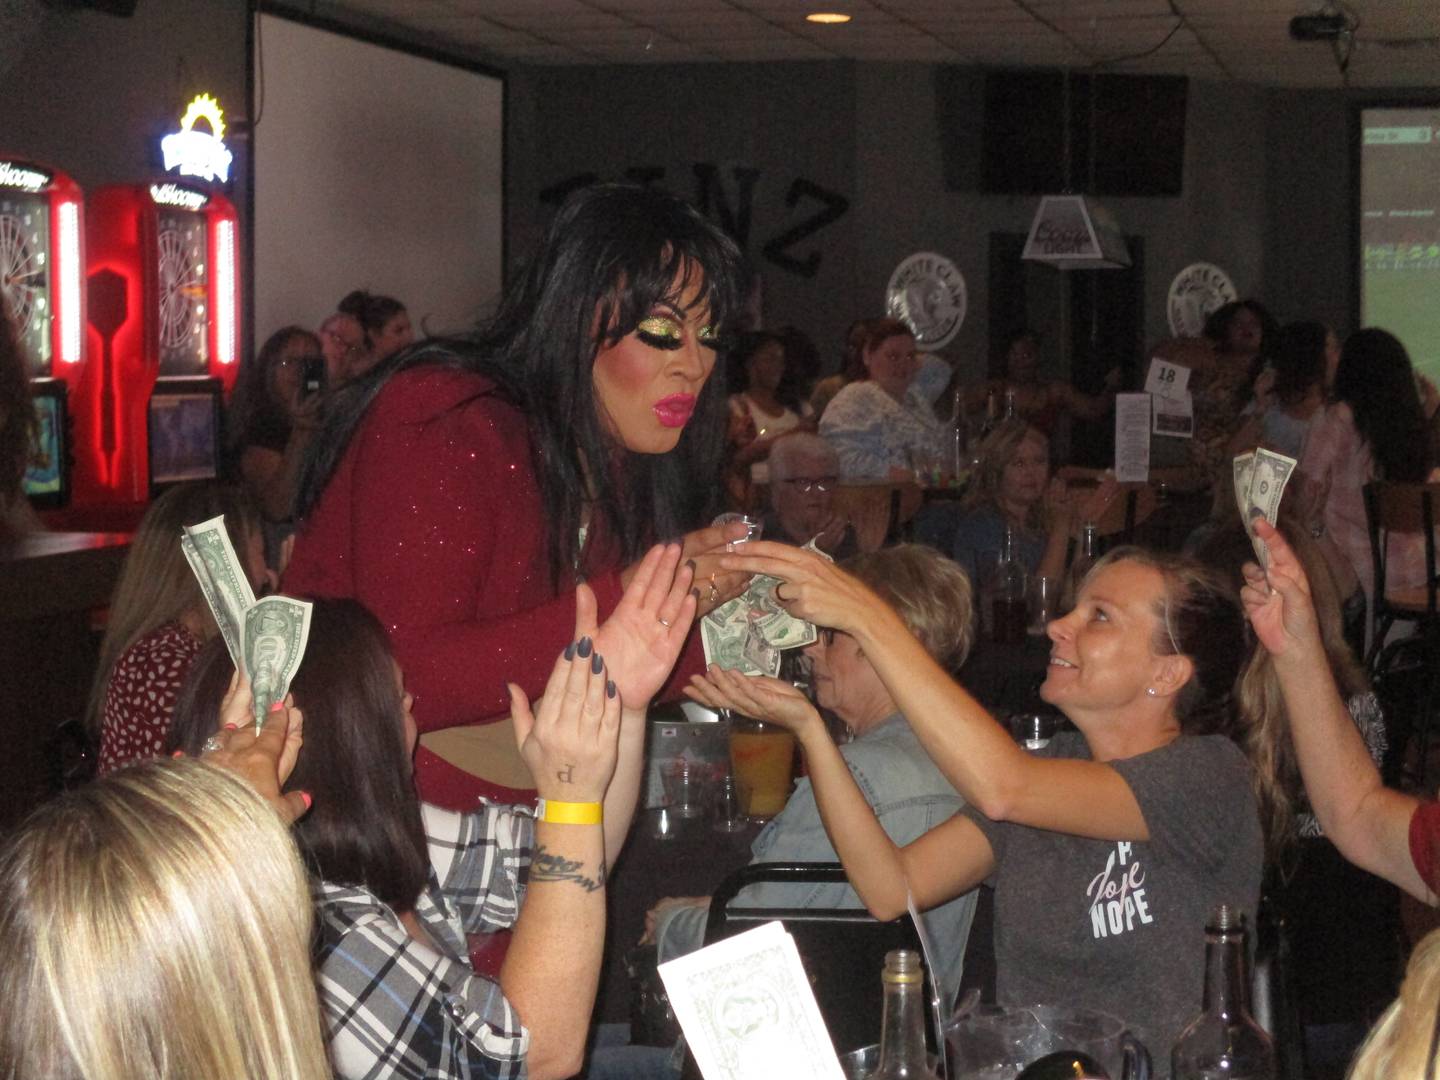 Patrons eagerly provide tips for drag performer Aleyna Couture during the "Funday Drag Brunch" at the Pinz Entertainment Center in Yorkville on Aug. 21, 2022.